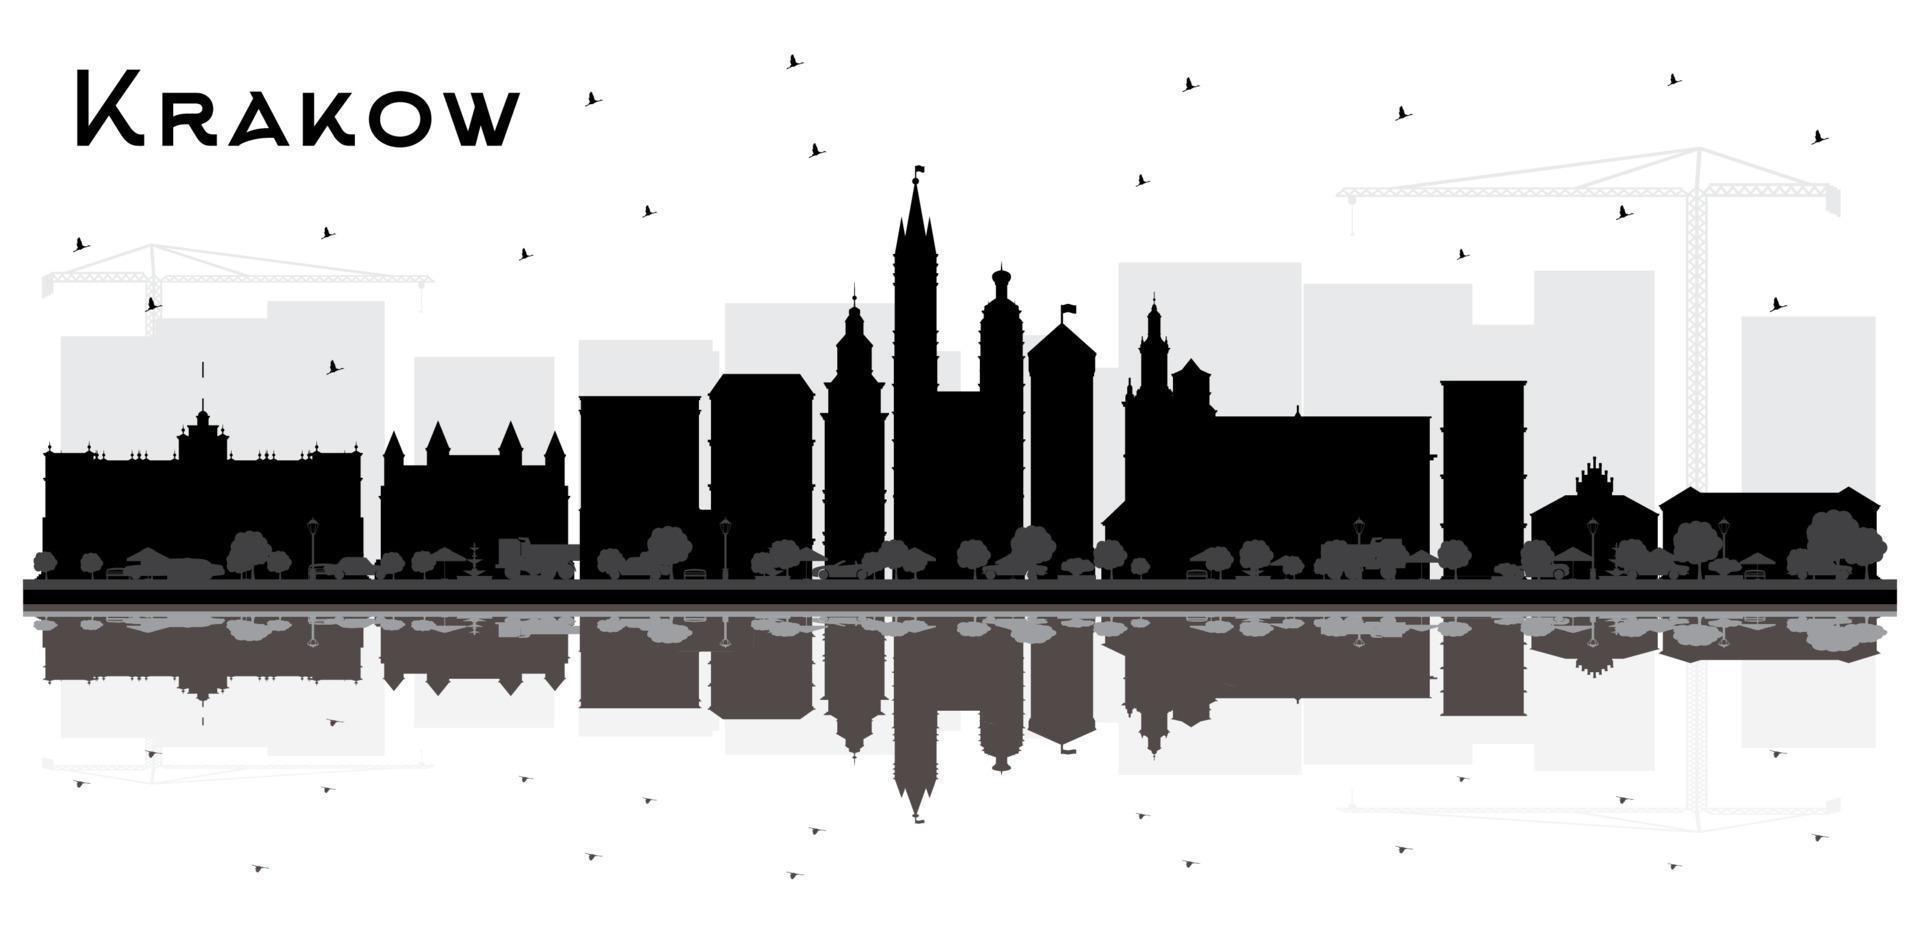 Krakow Poland City Skyline Silhouette with Black Buildings and Reflections Isolated on White. vector